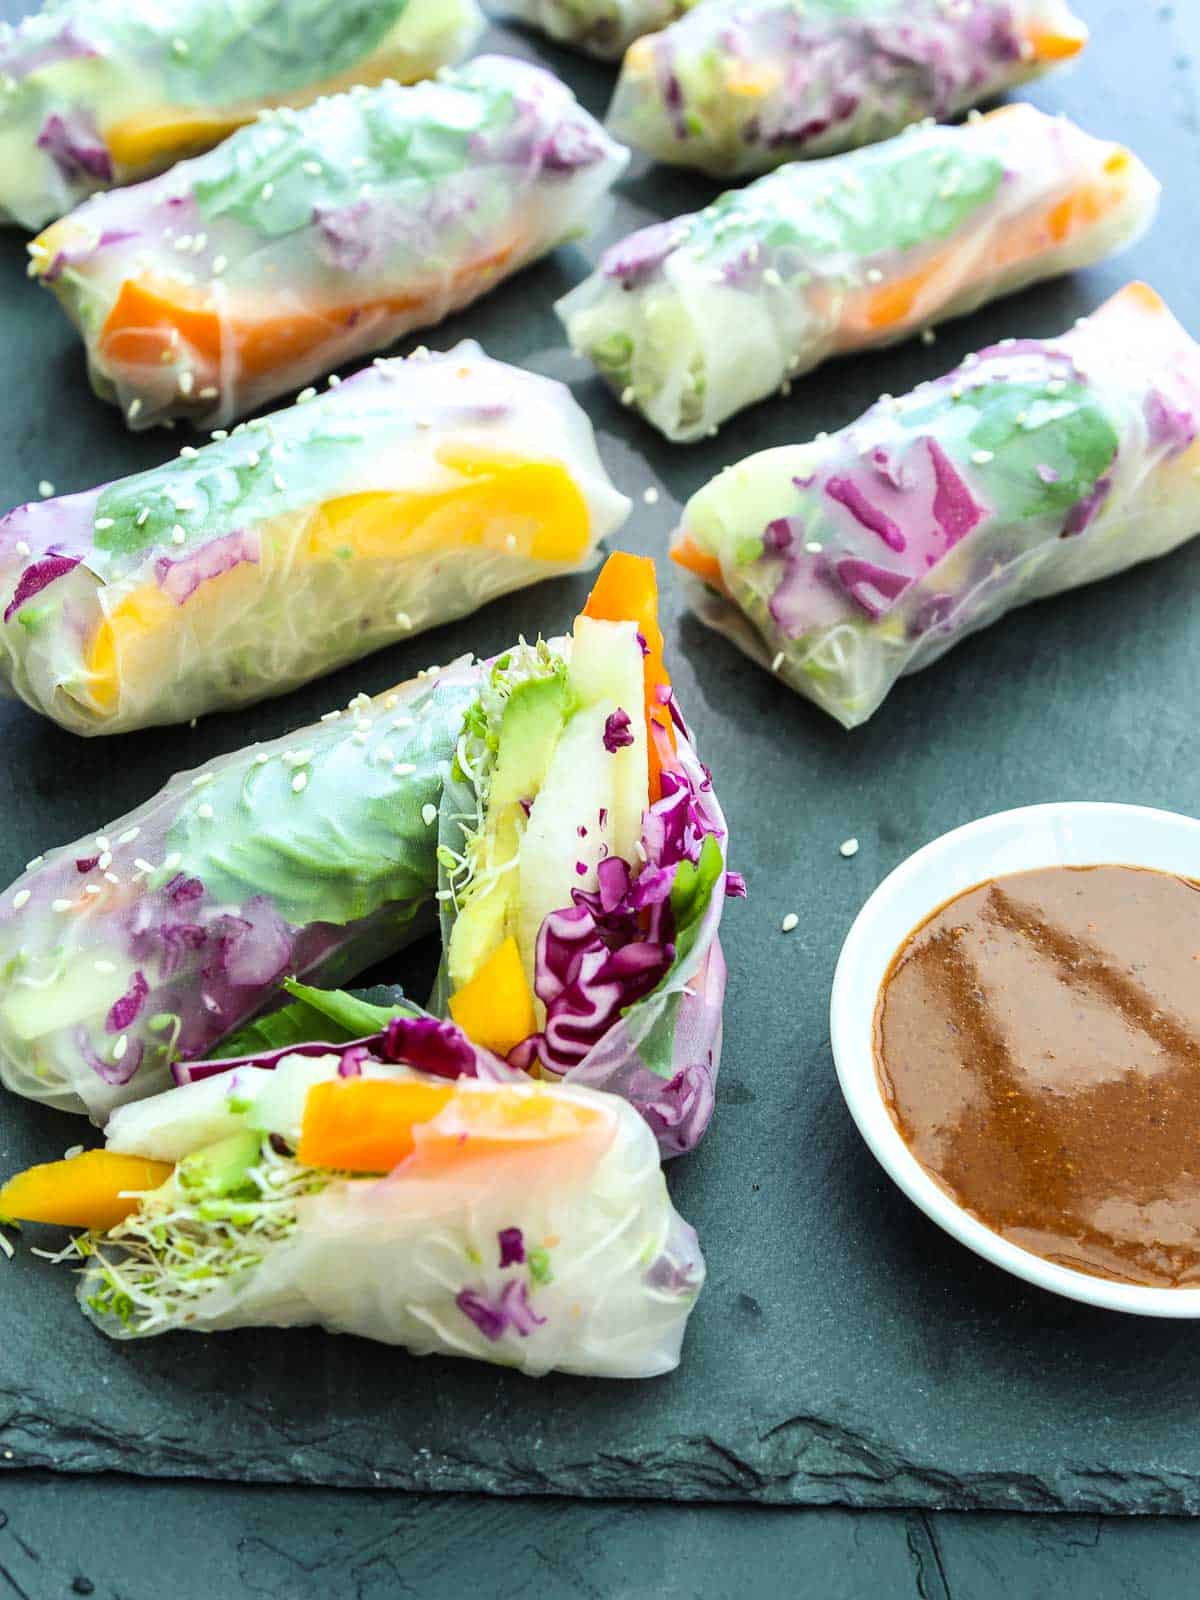 A sliced open spring roll made with rice paper wrapper stuffed with colorful veggies.